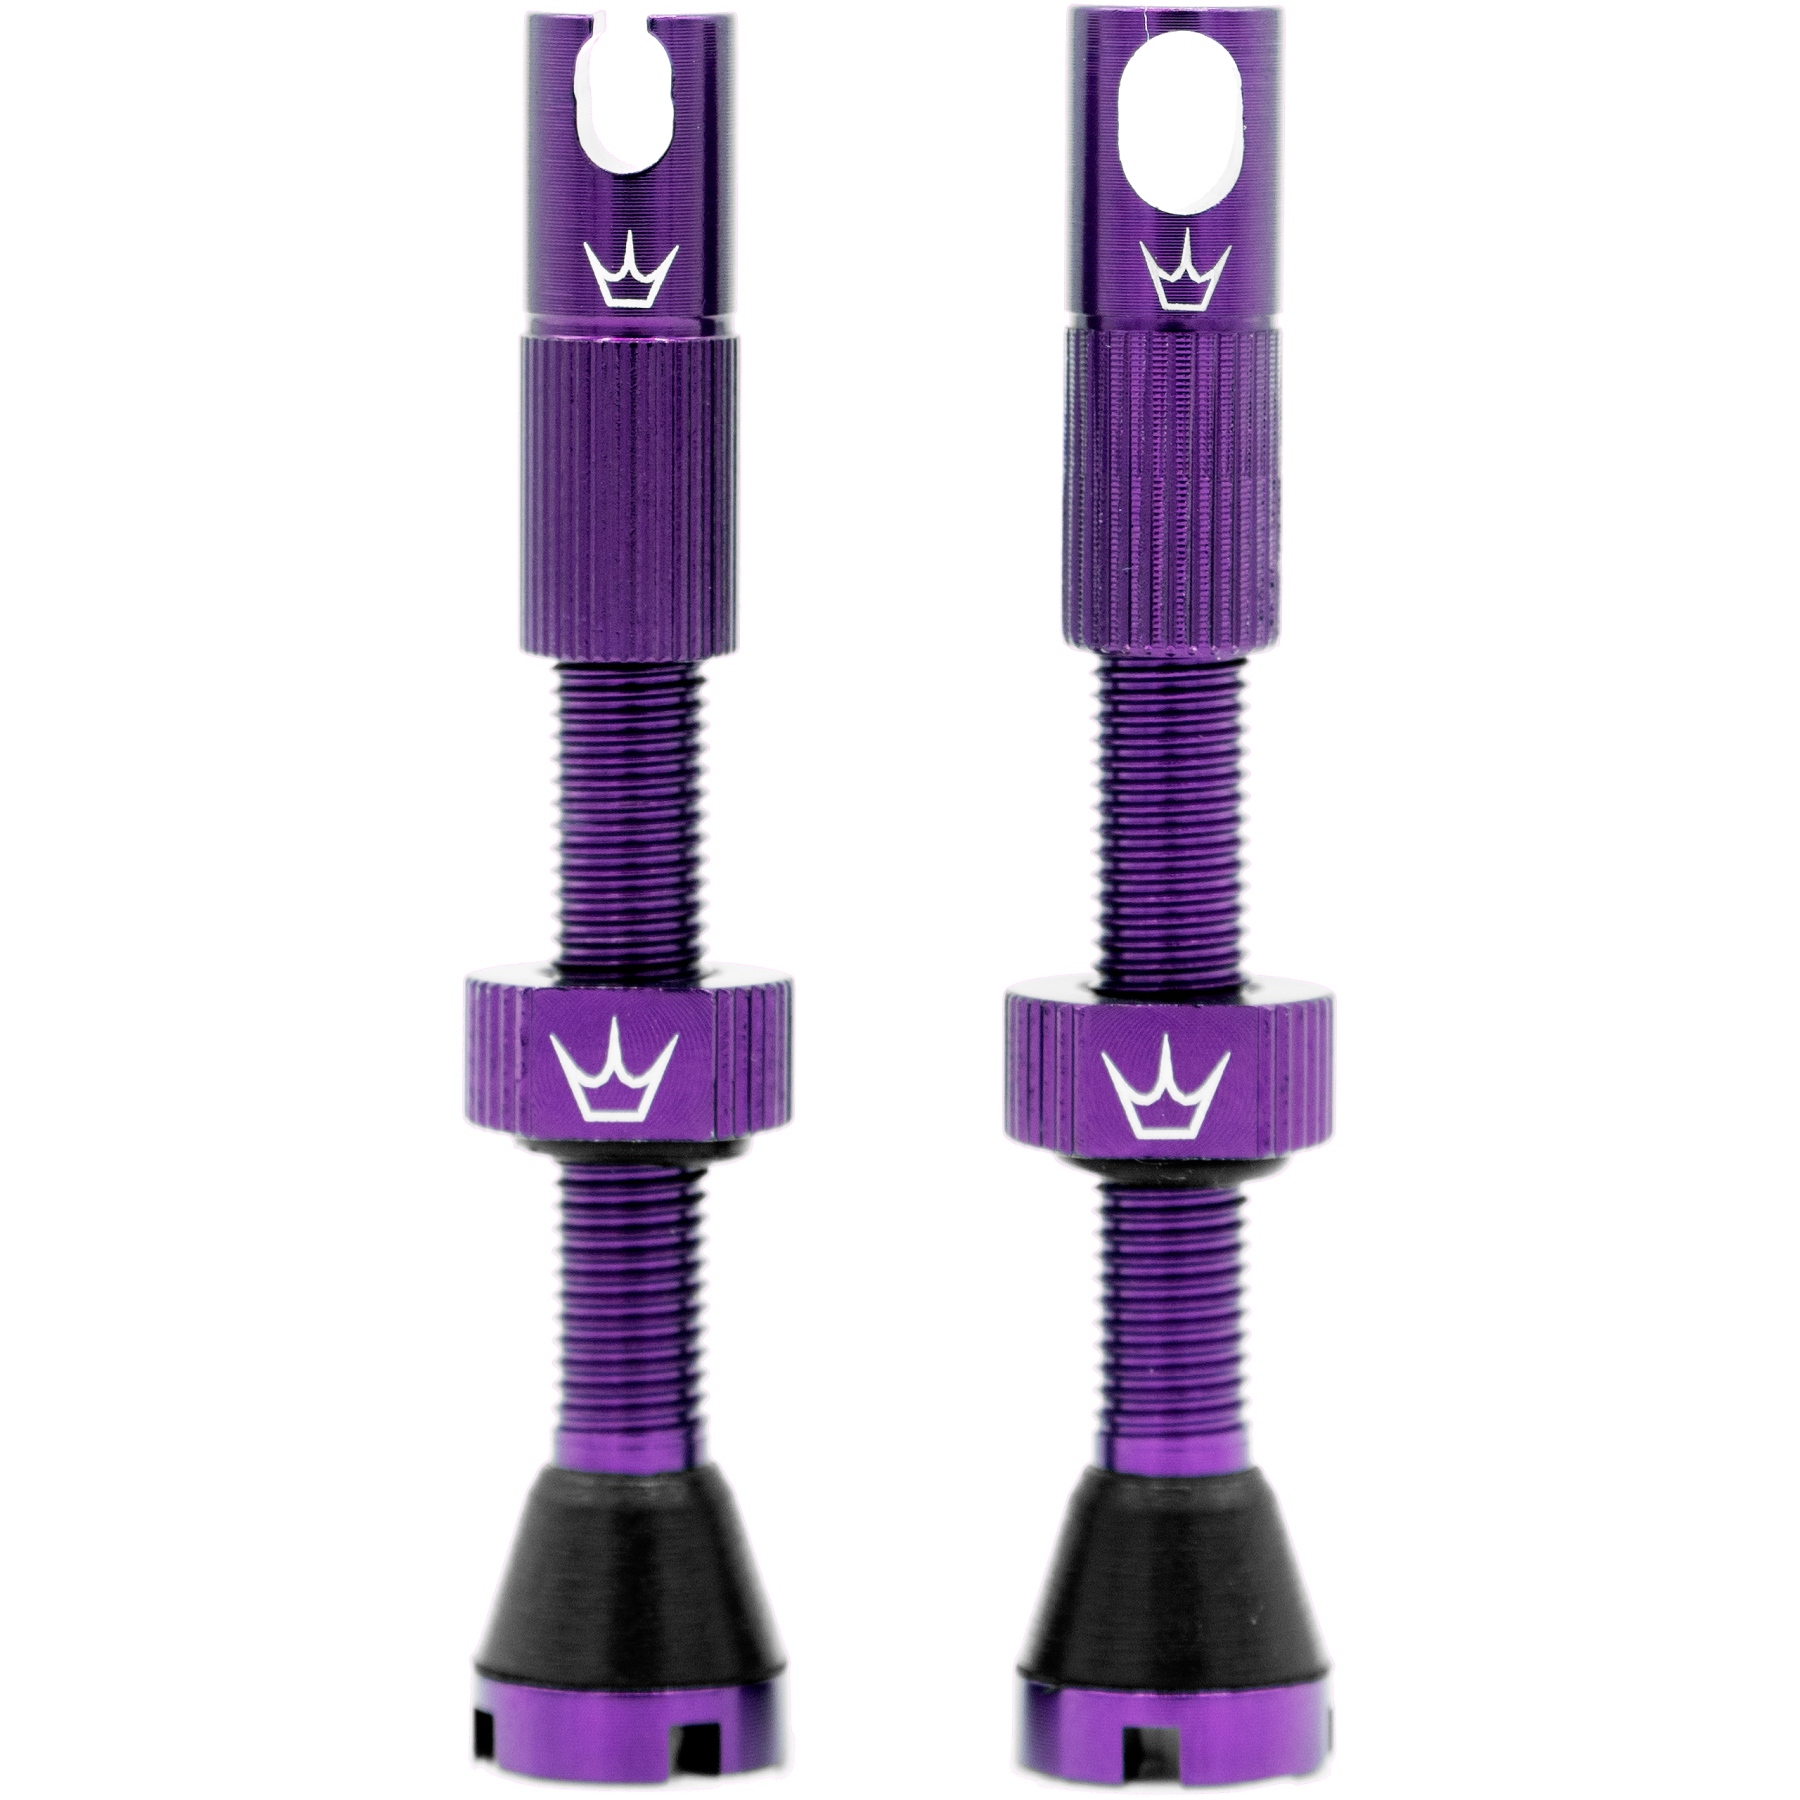 Picture of Peaty&#039;s x Chris King Tubeless Valves - MK2 - violet